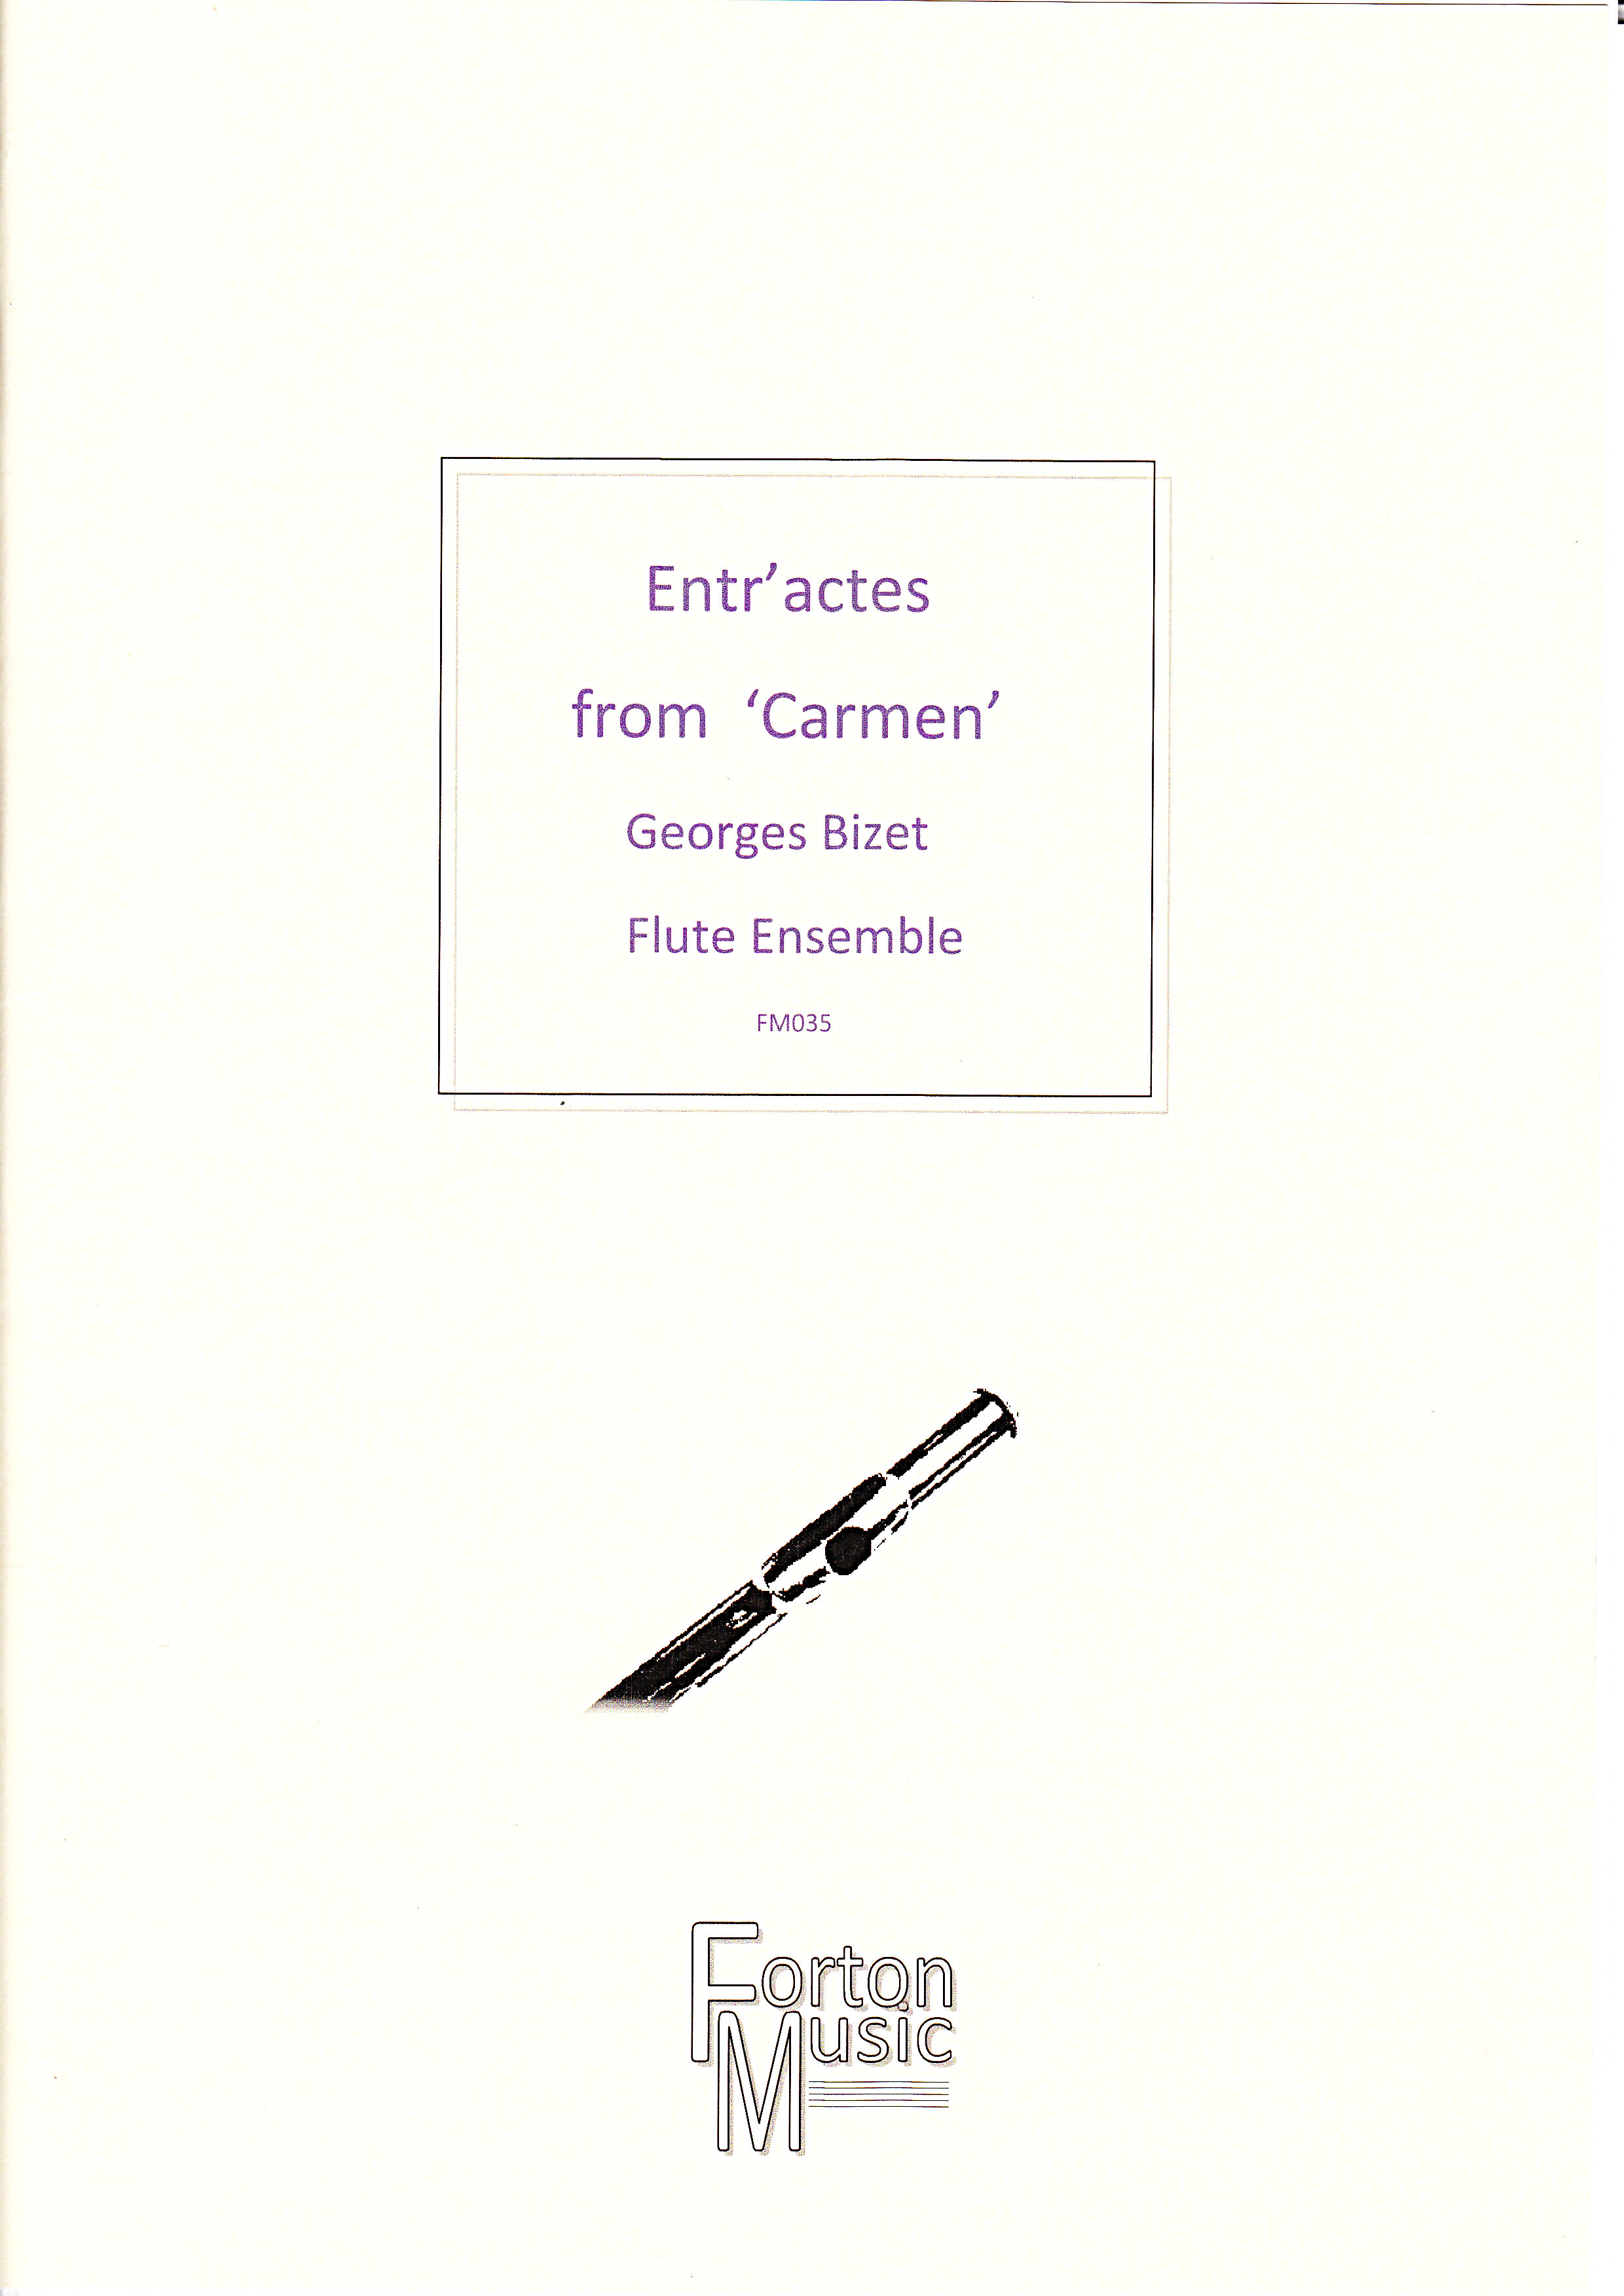 ENTRACTES from Carmen